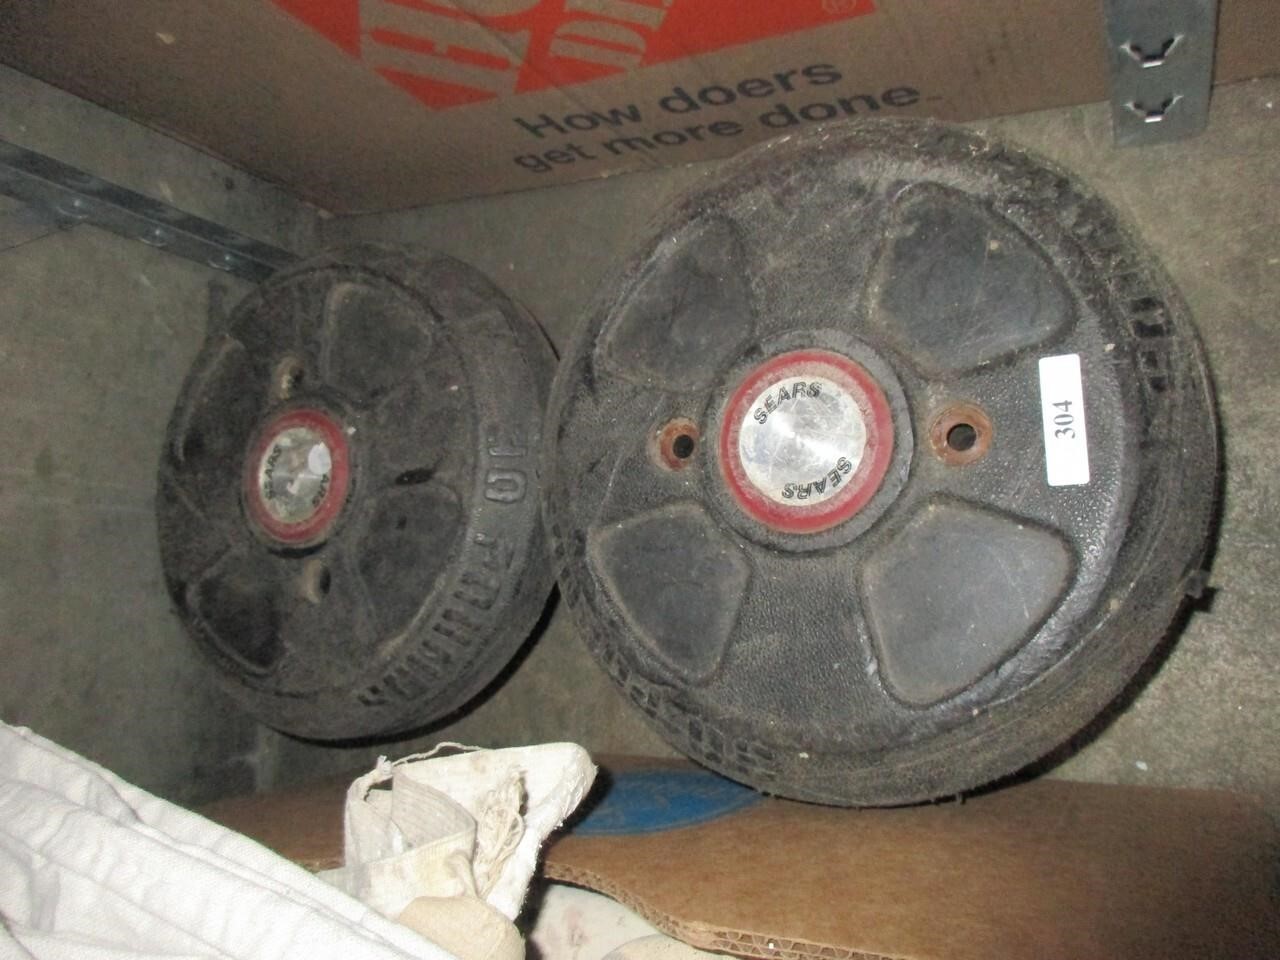 Sears Craftsman riding lawnmower weights